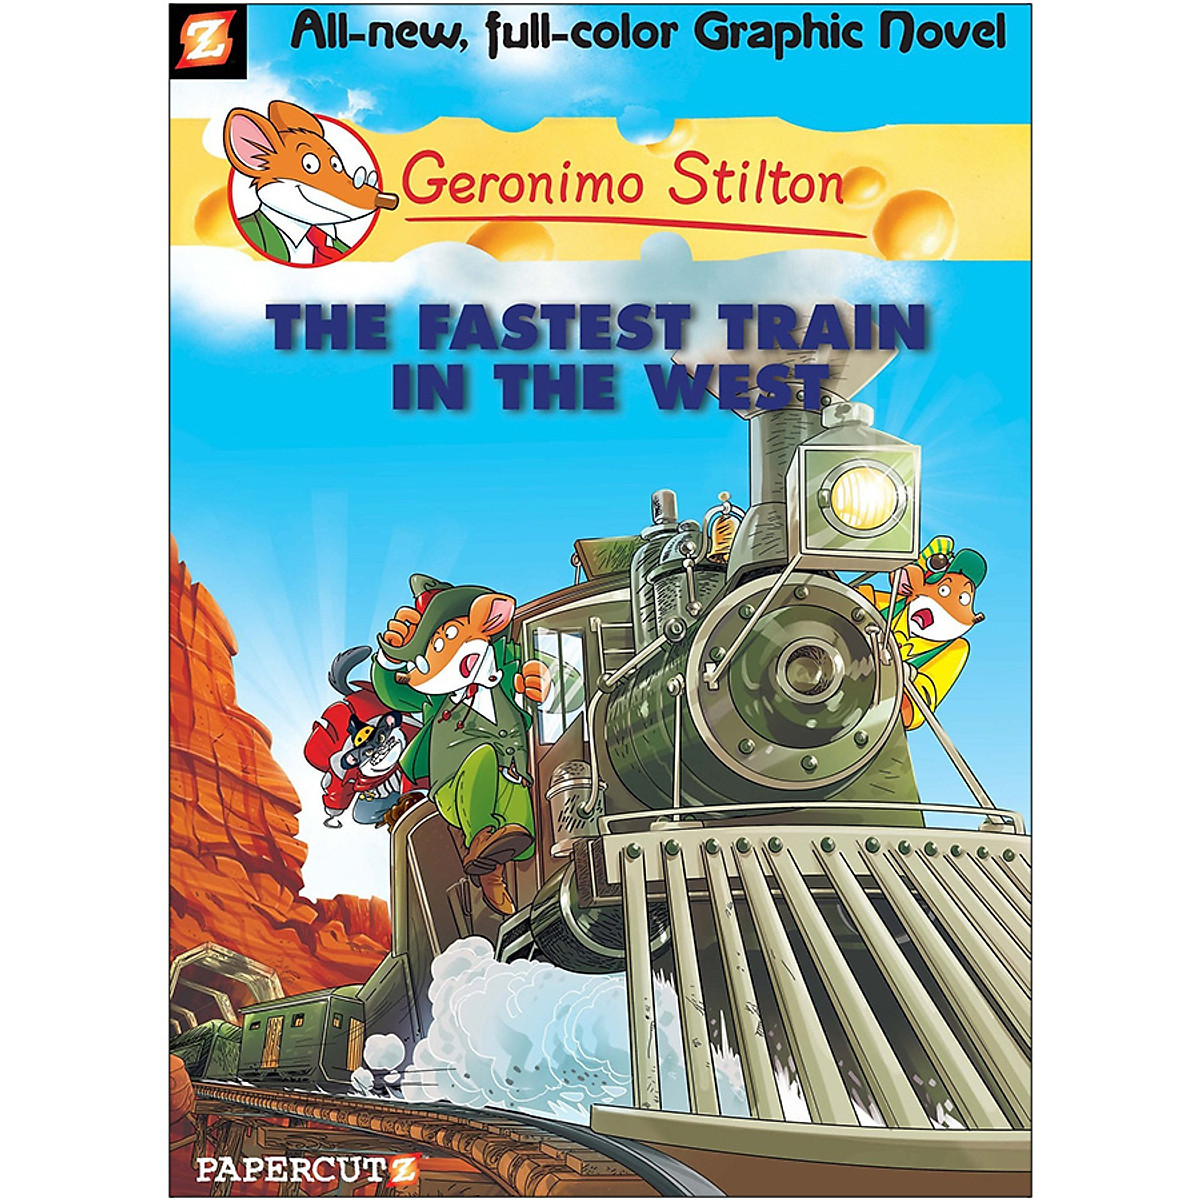 Geronimo Stilton: The Fastest Train In The West (All-new, full-color Graphic Novel)